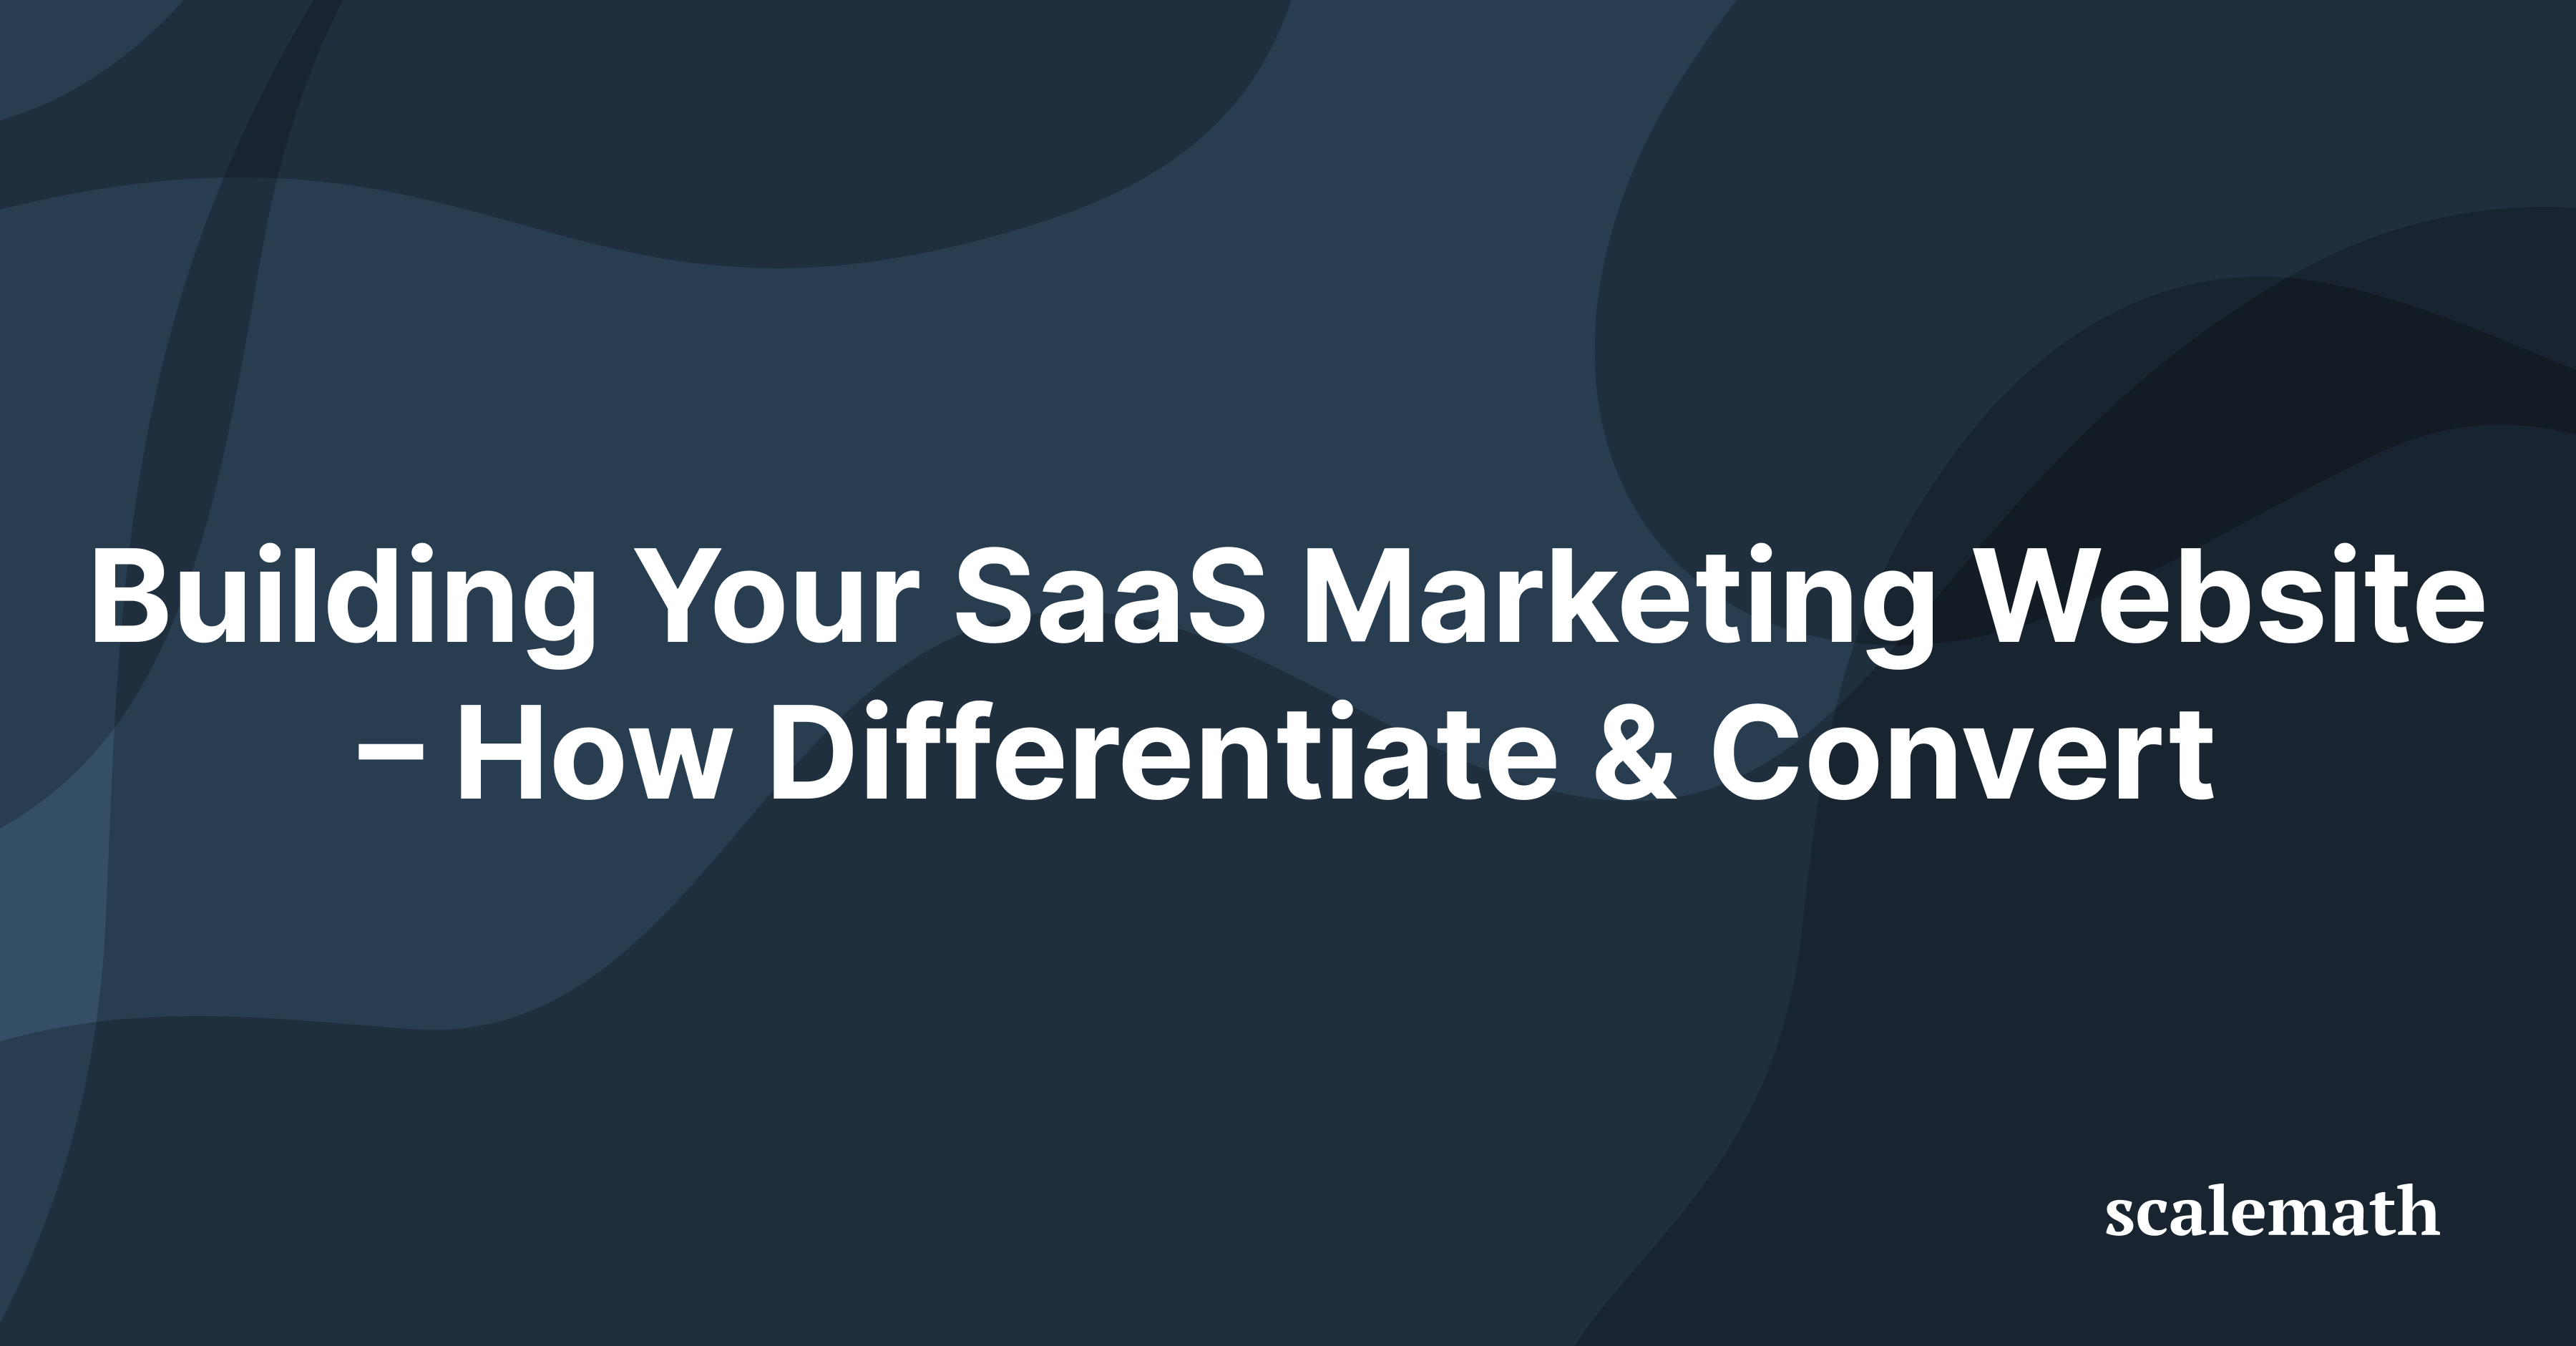 Building Your SaaS Website – Our Framework to Convert & Differentiate